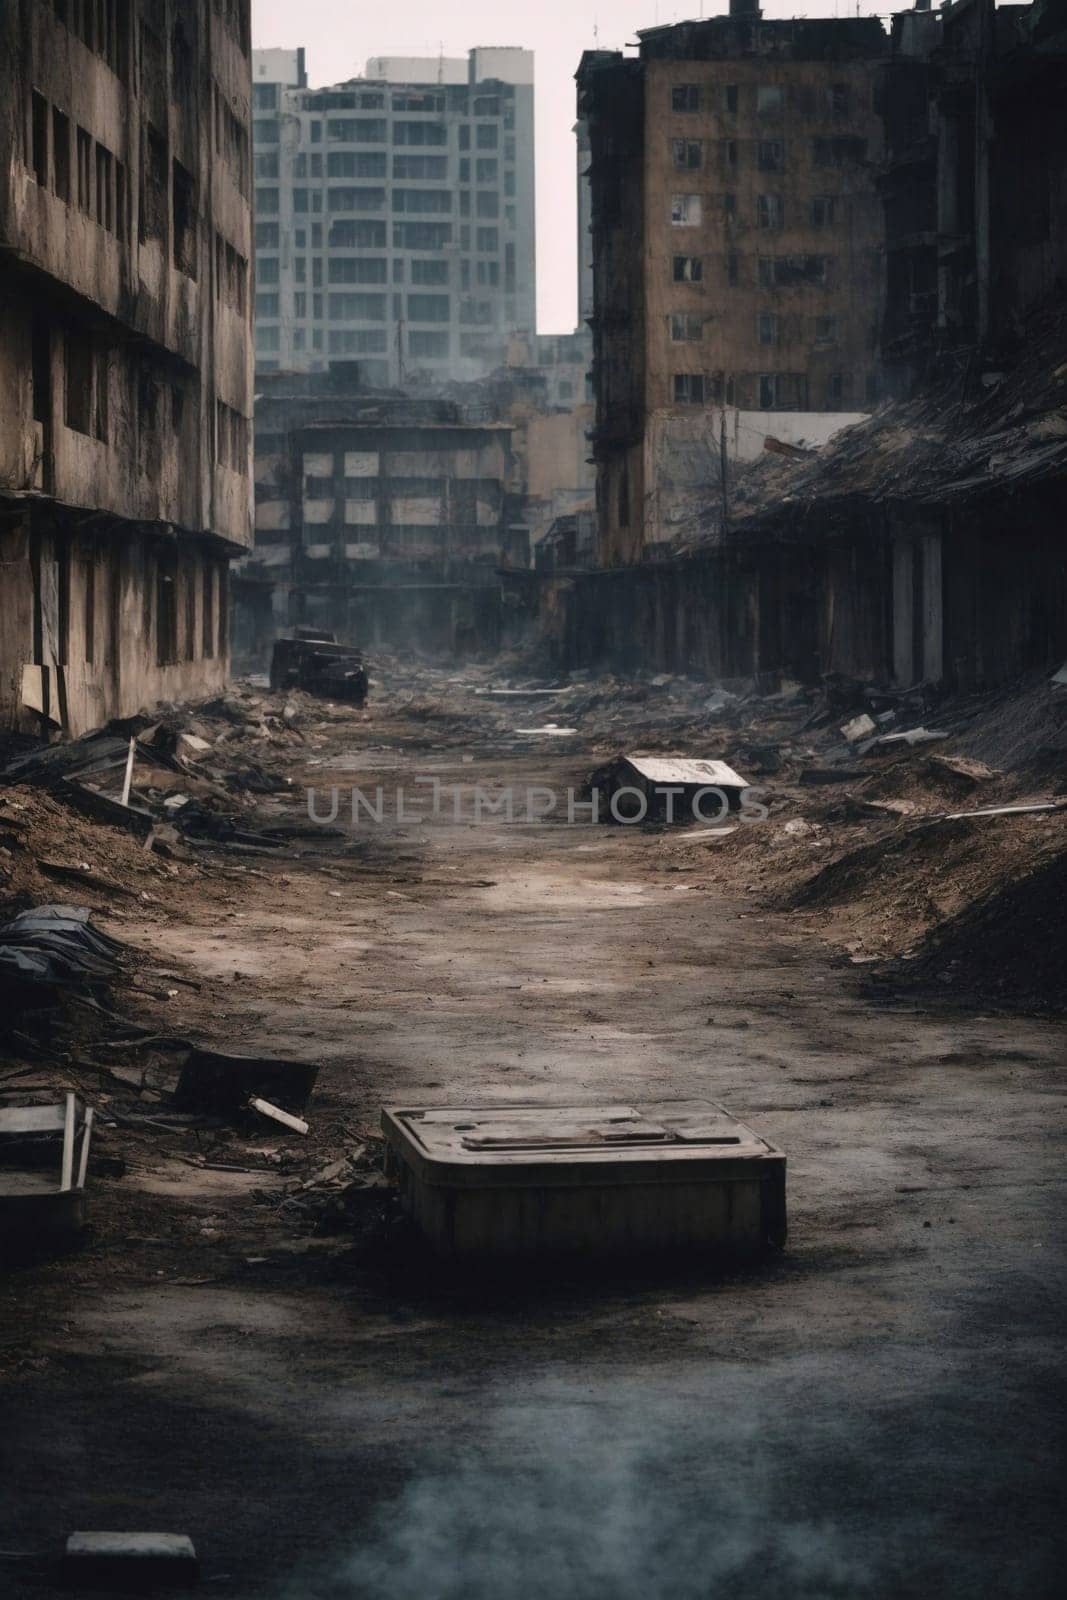 This photo captures a bustling city street, filled with grime and activity, as towering buildings loom in the distance.